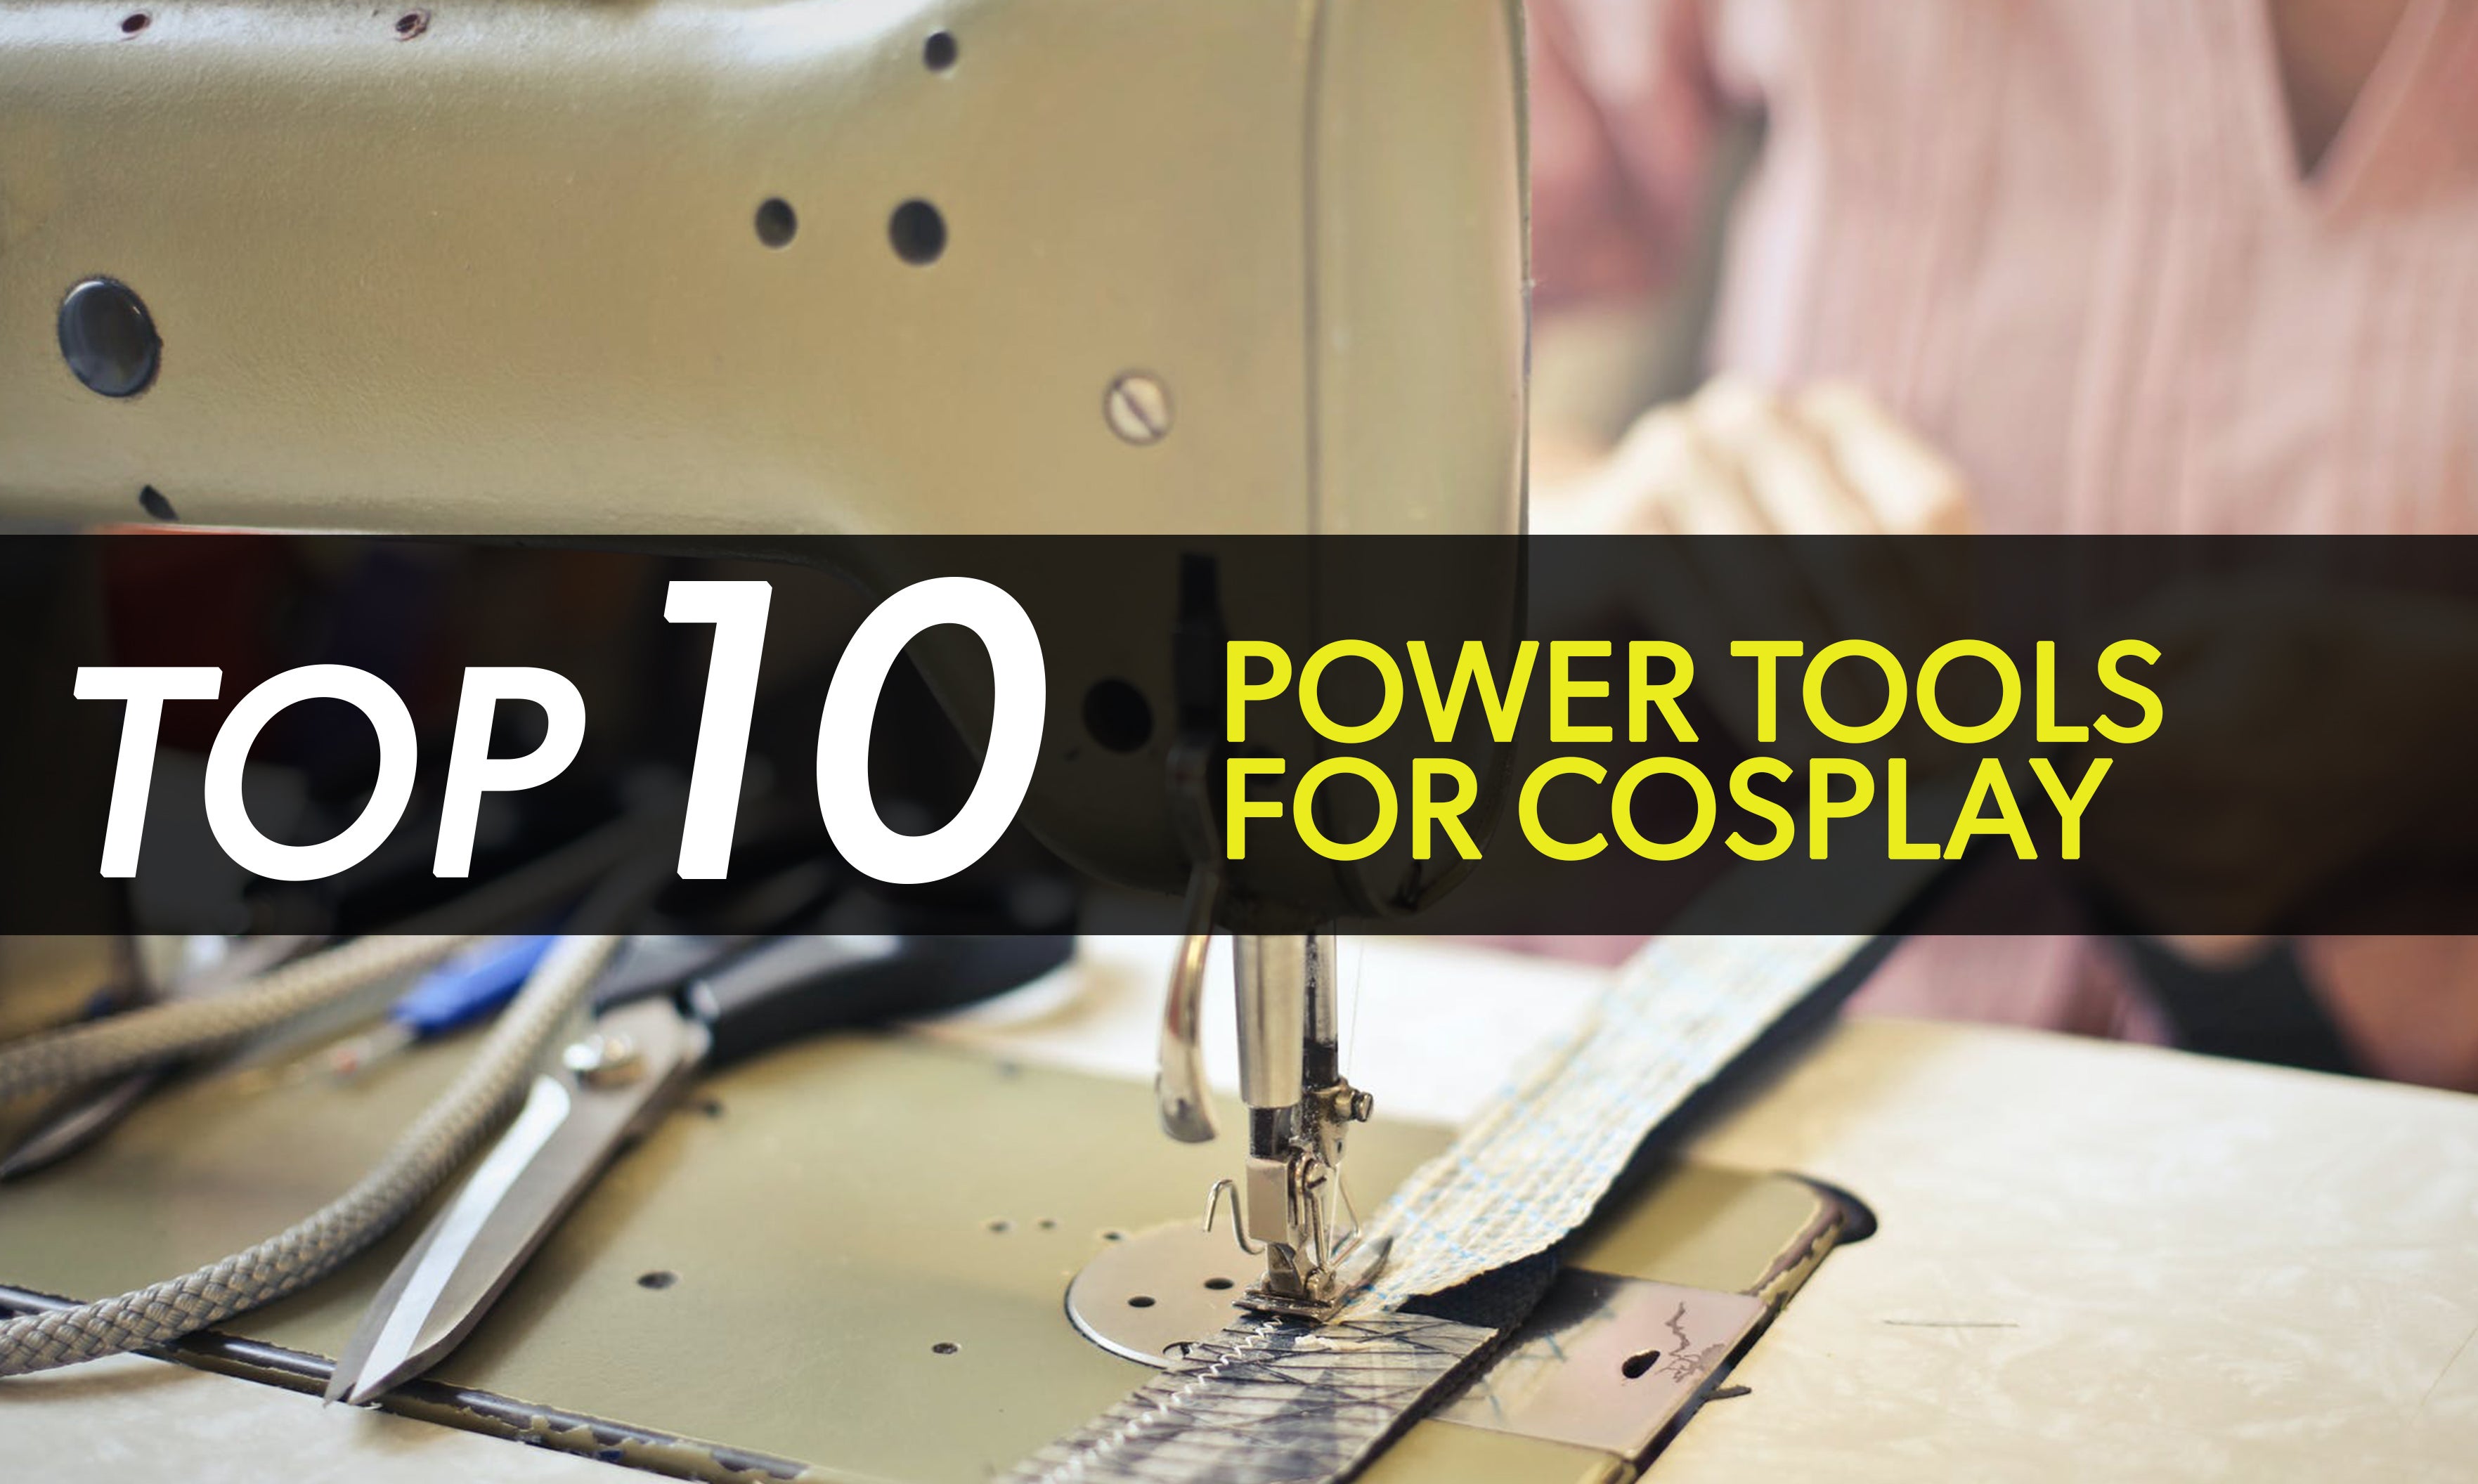 Top 10 Power Tools